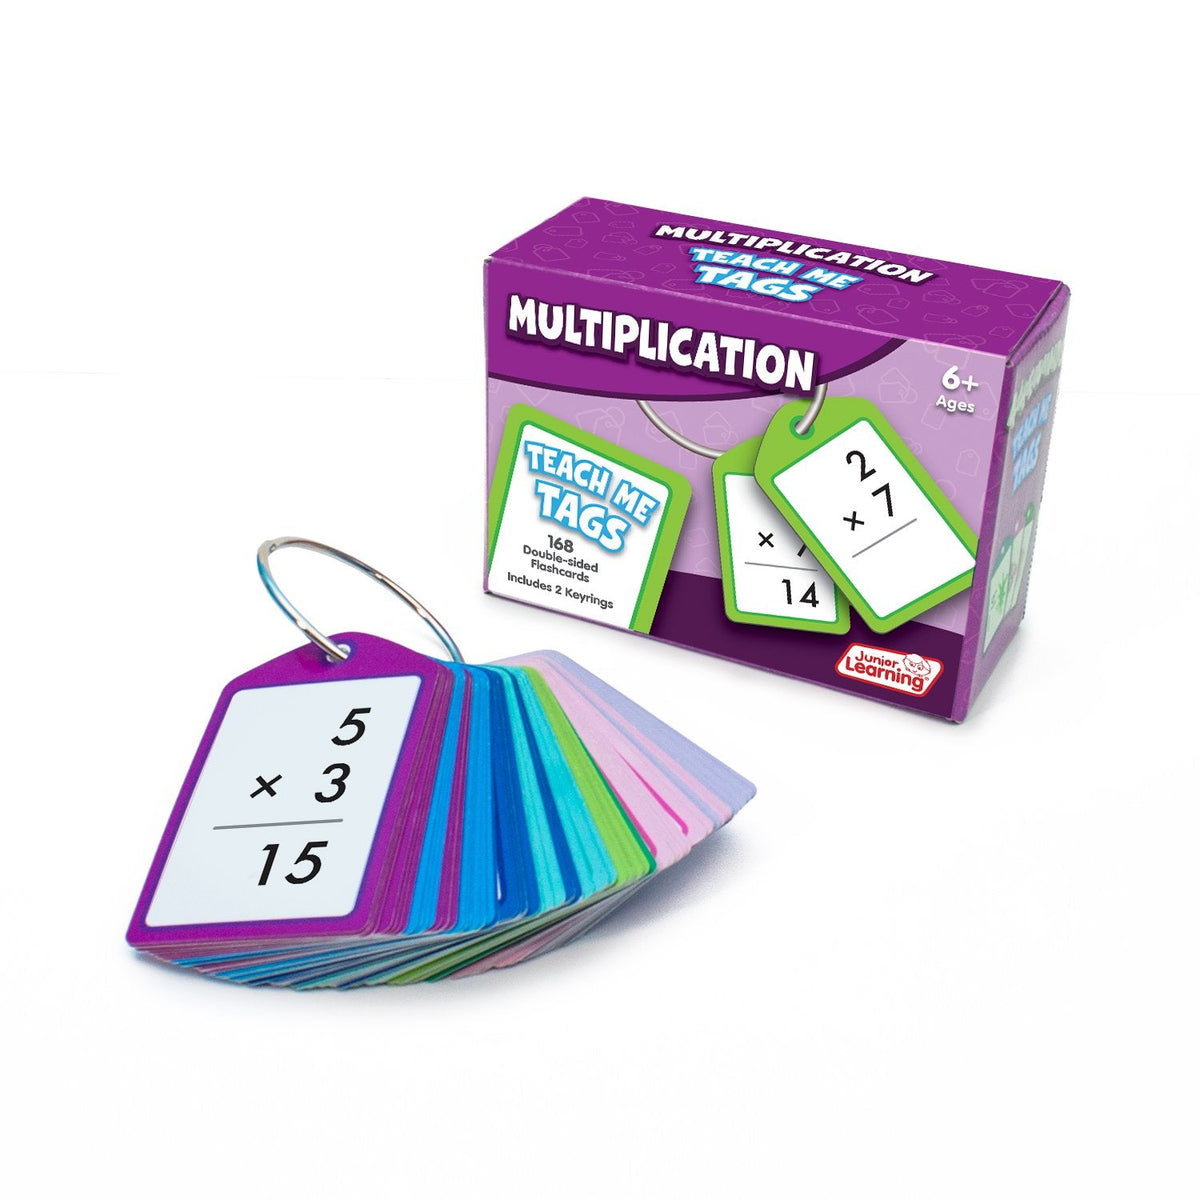 Junior Learning JL632 Multiplication Teach Me Tags box and cards